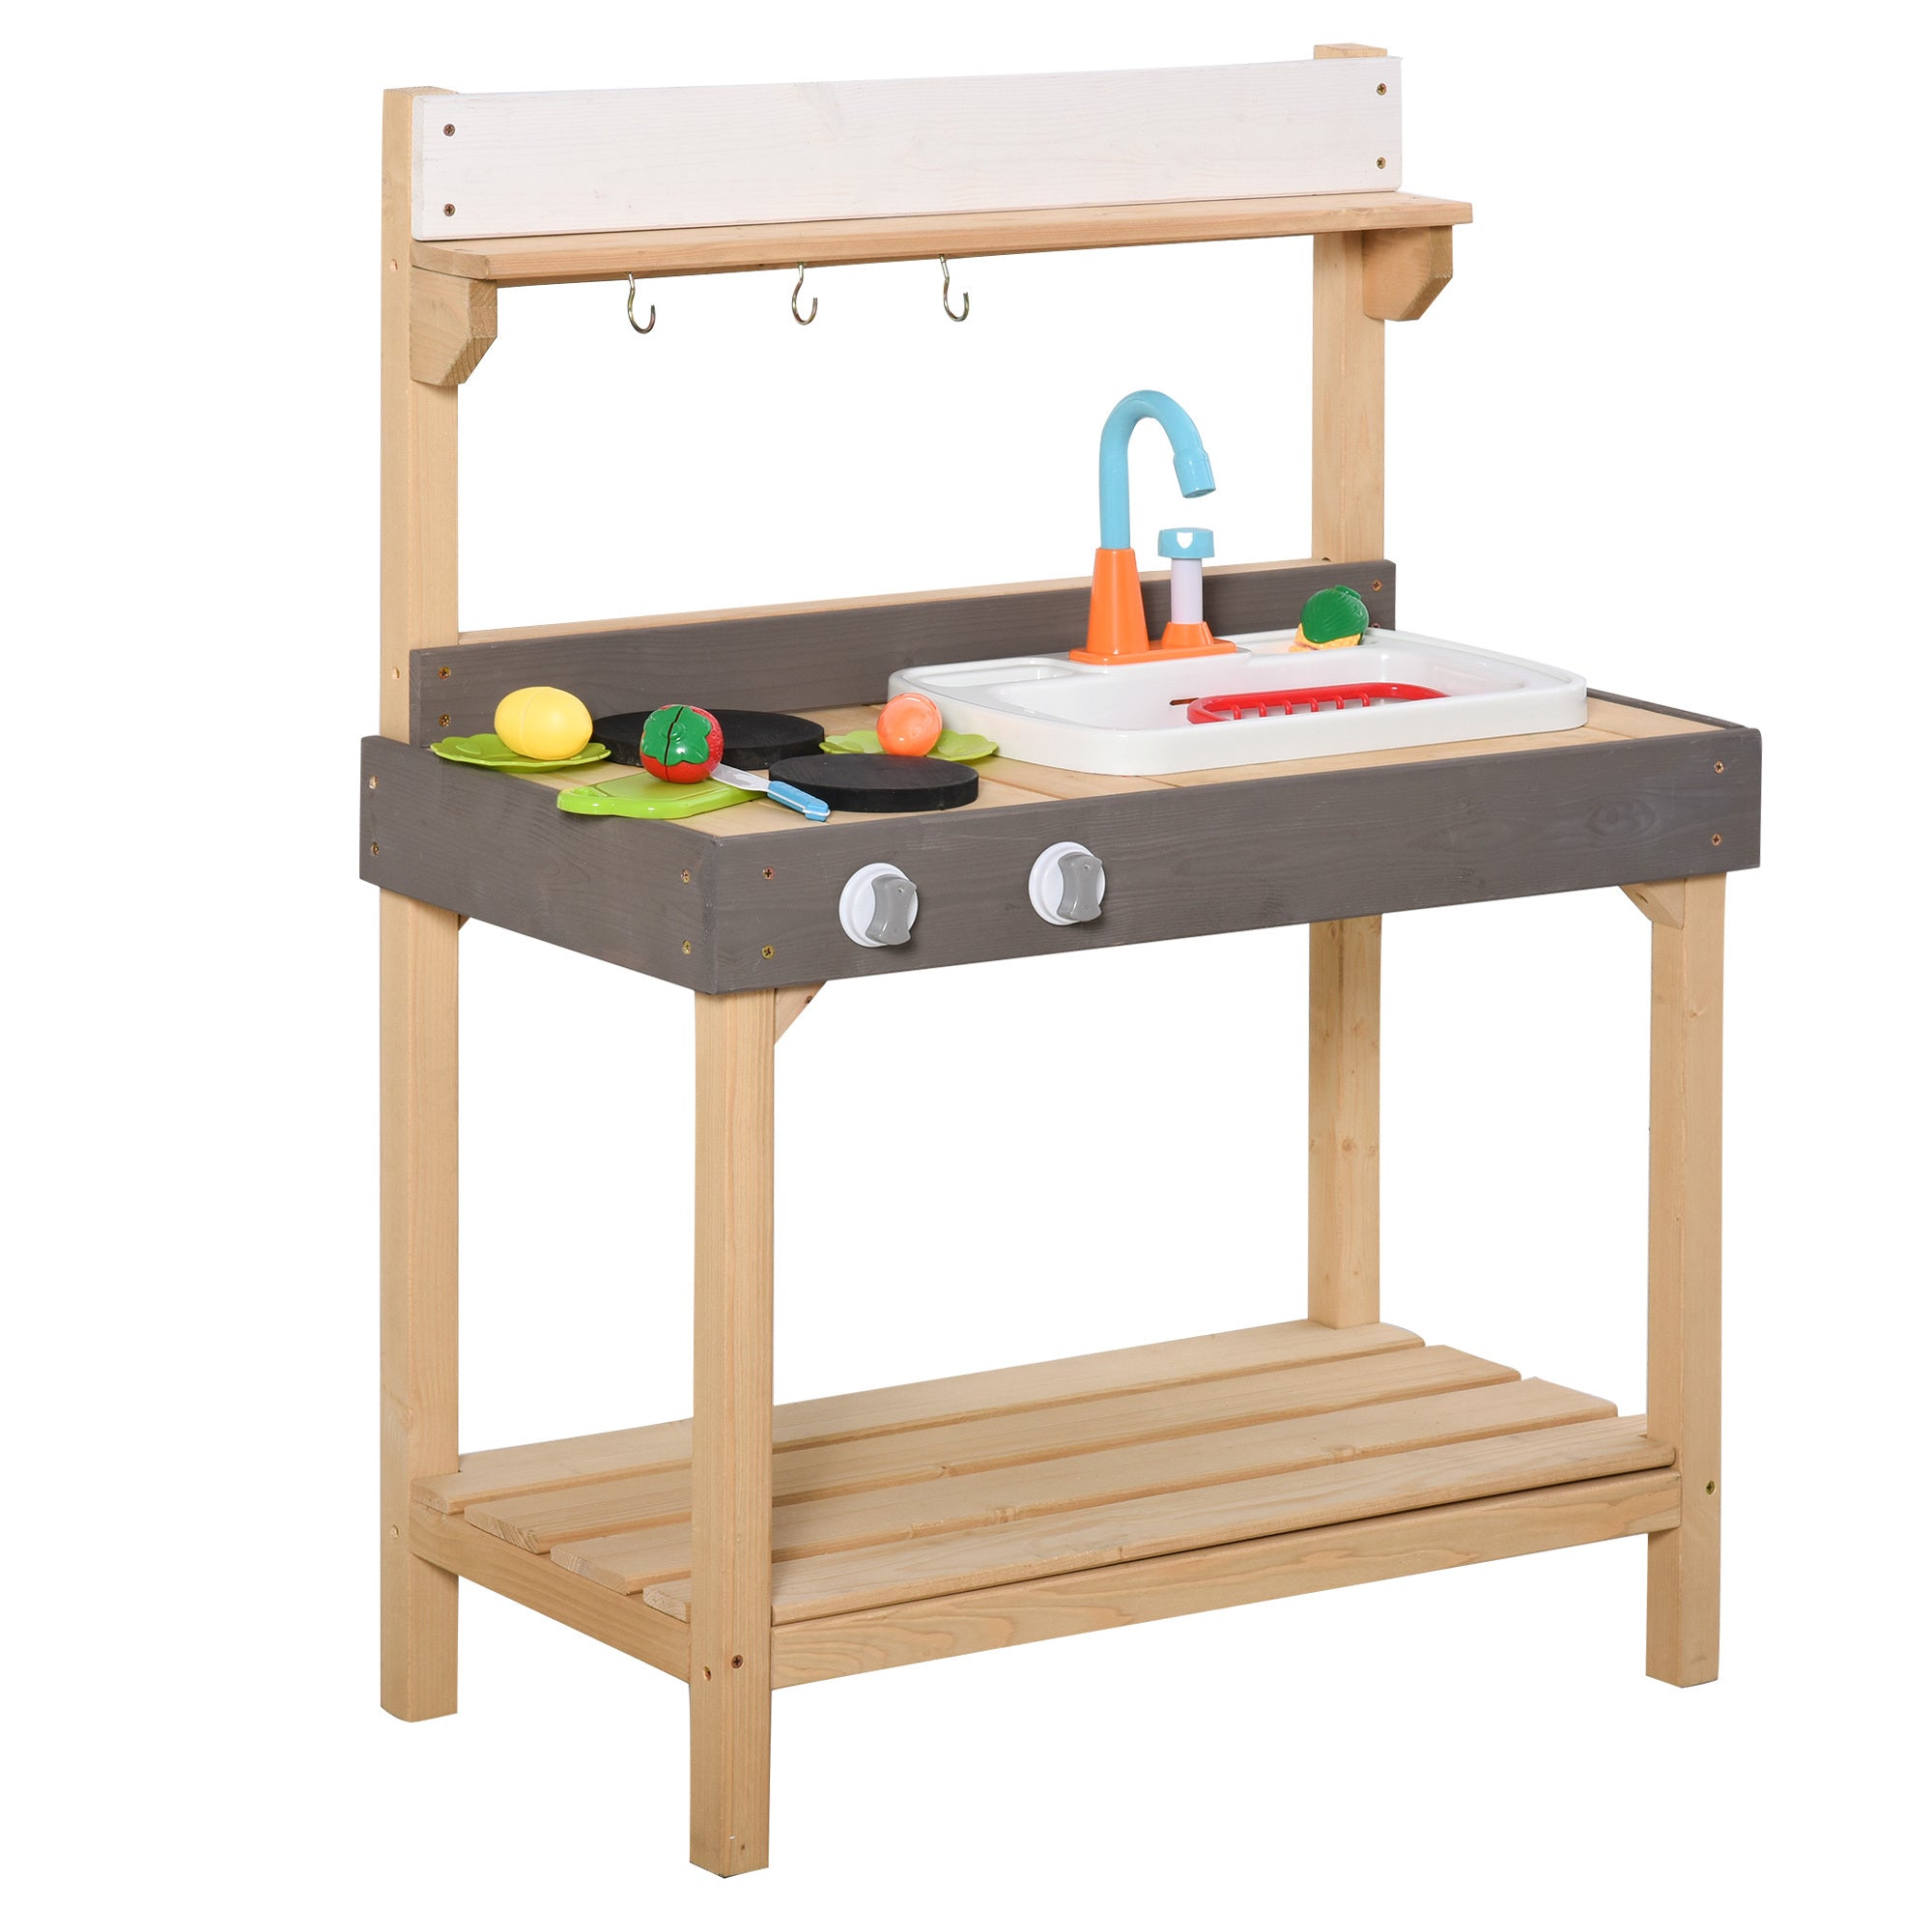 Outsunny Kids Kitchen, Playset Game with Sink,